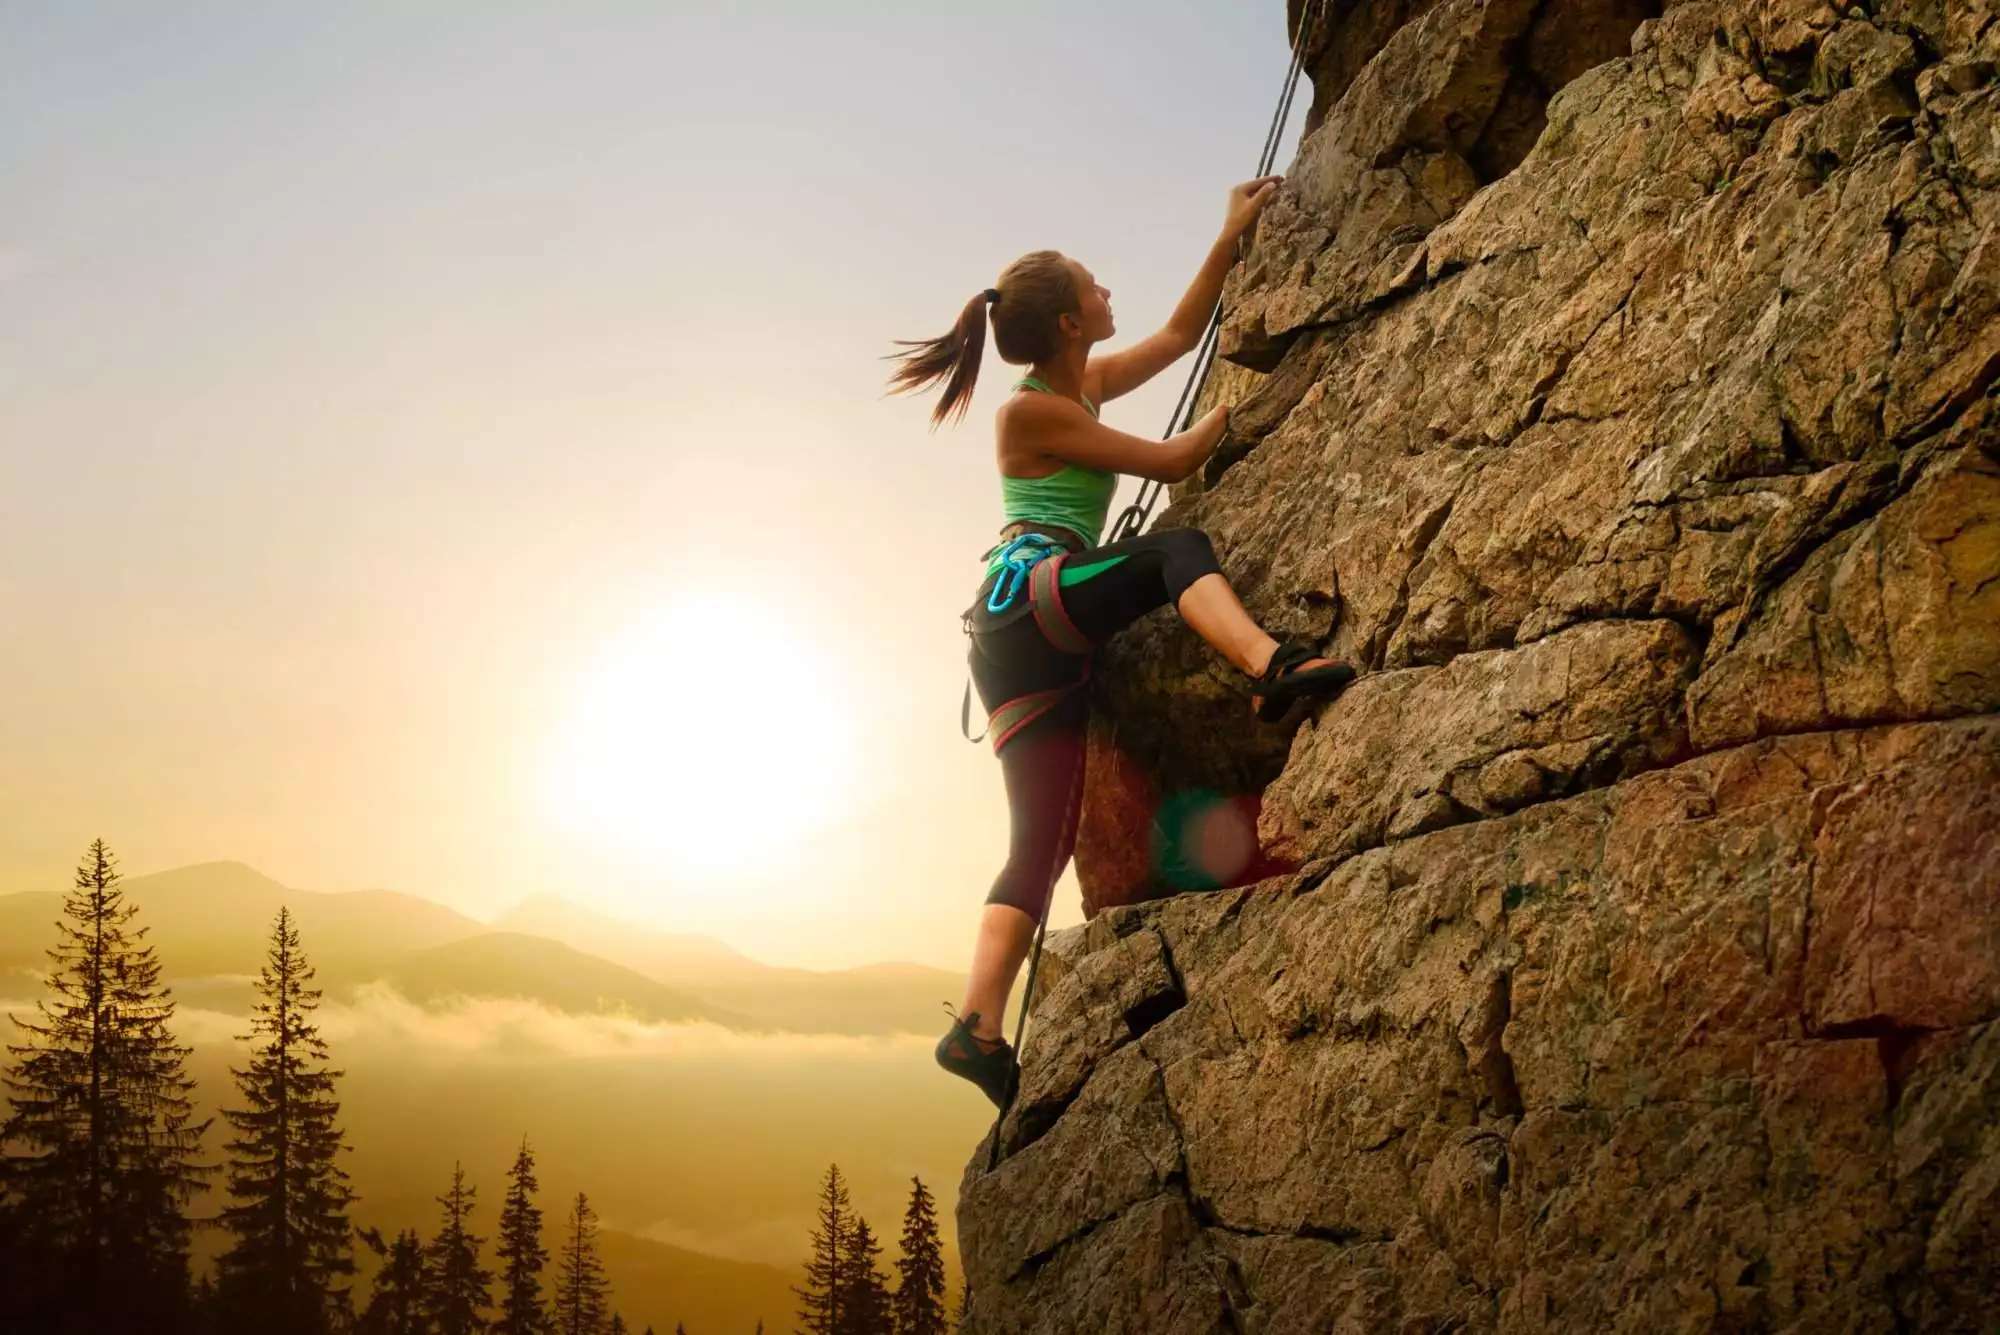 Ultimate Rock Climbing Guide - 10 Great Tips! 2